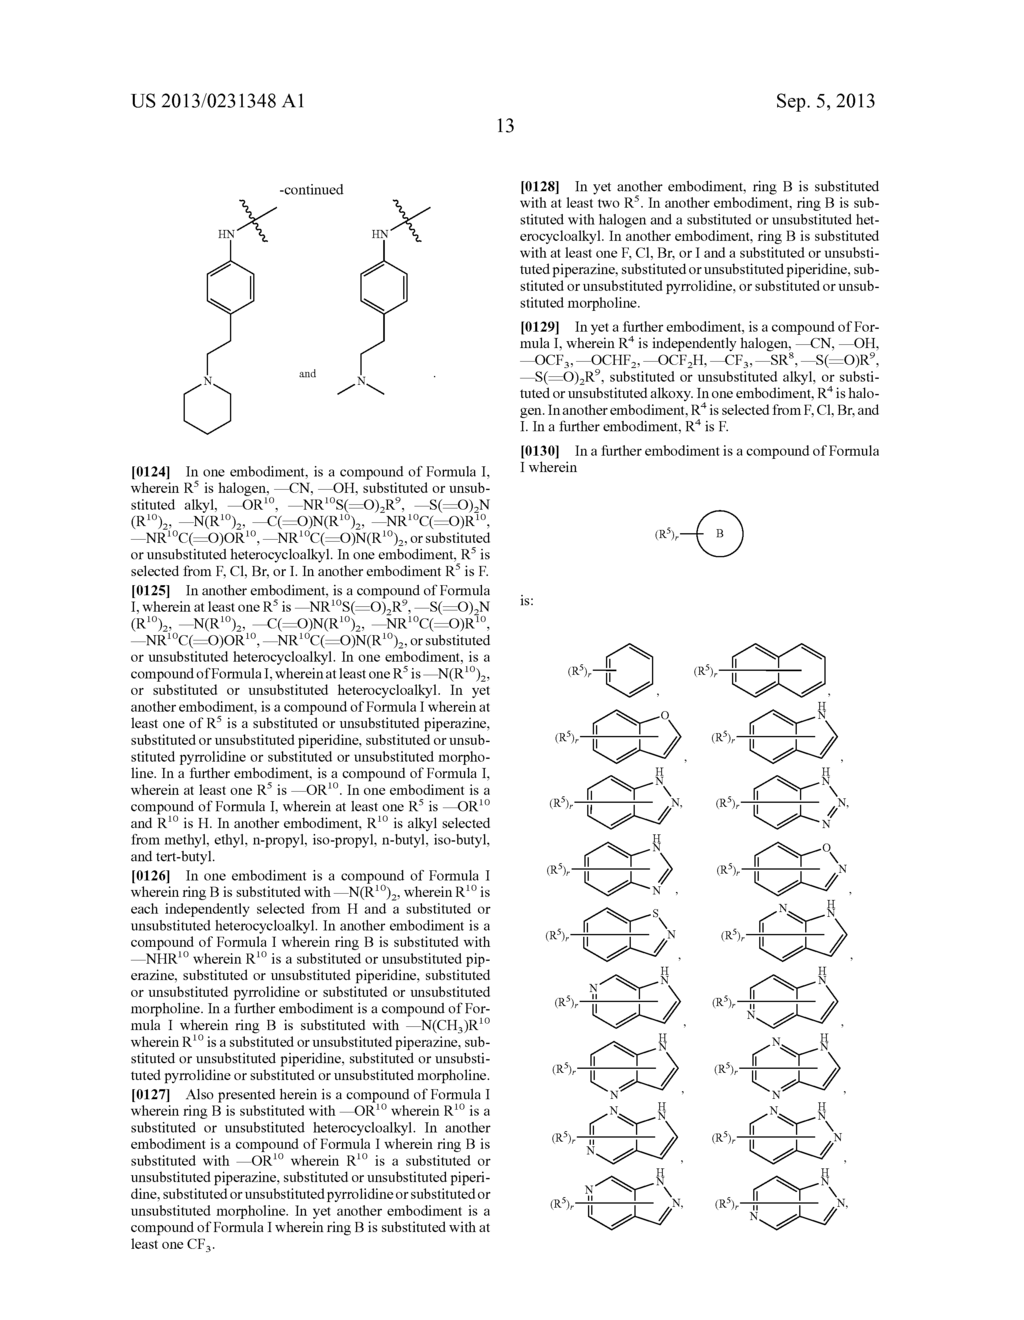 8-(HETEROARYLMETHYL)PYRIDO[2,3-d]PYRIMIDIN-7(8H)-ONES FOR THE TREATMENT OF     CNS DISORDERS - diagram, schematic, and image 17